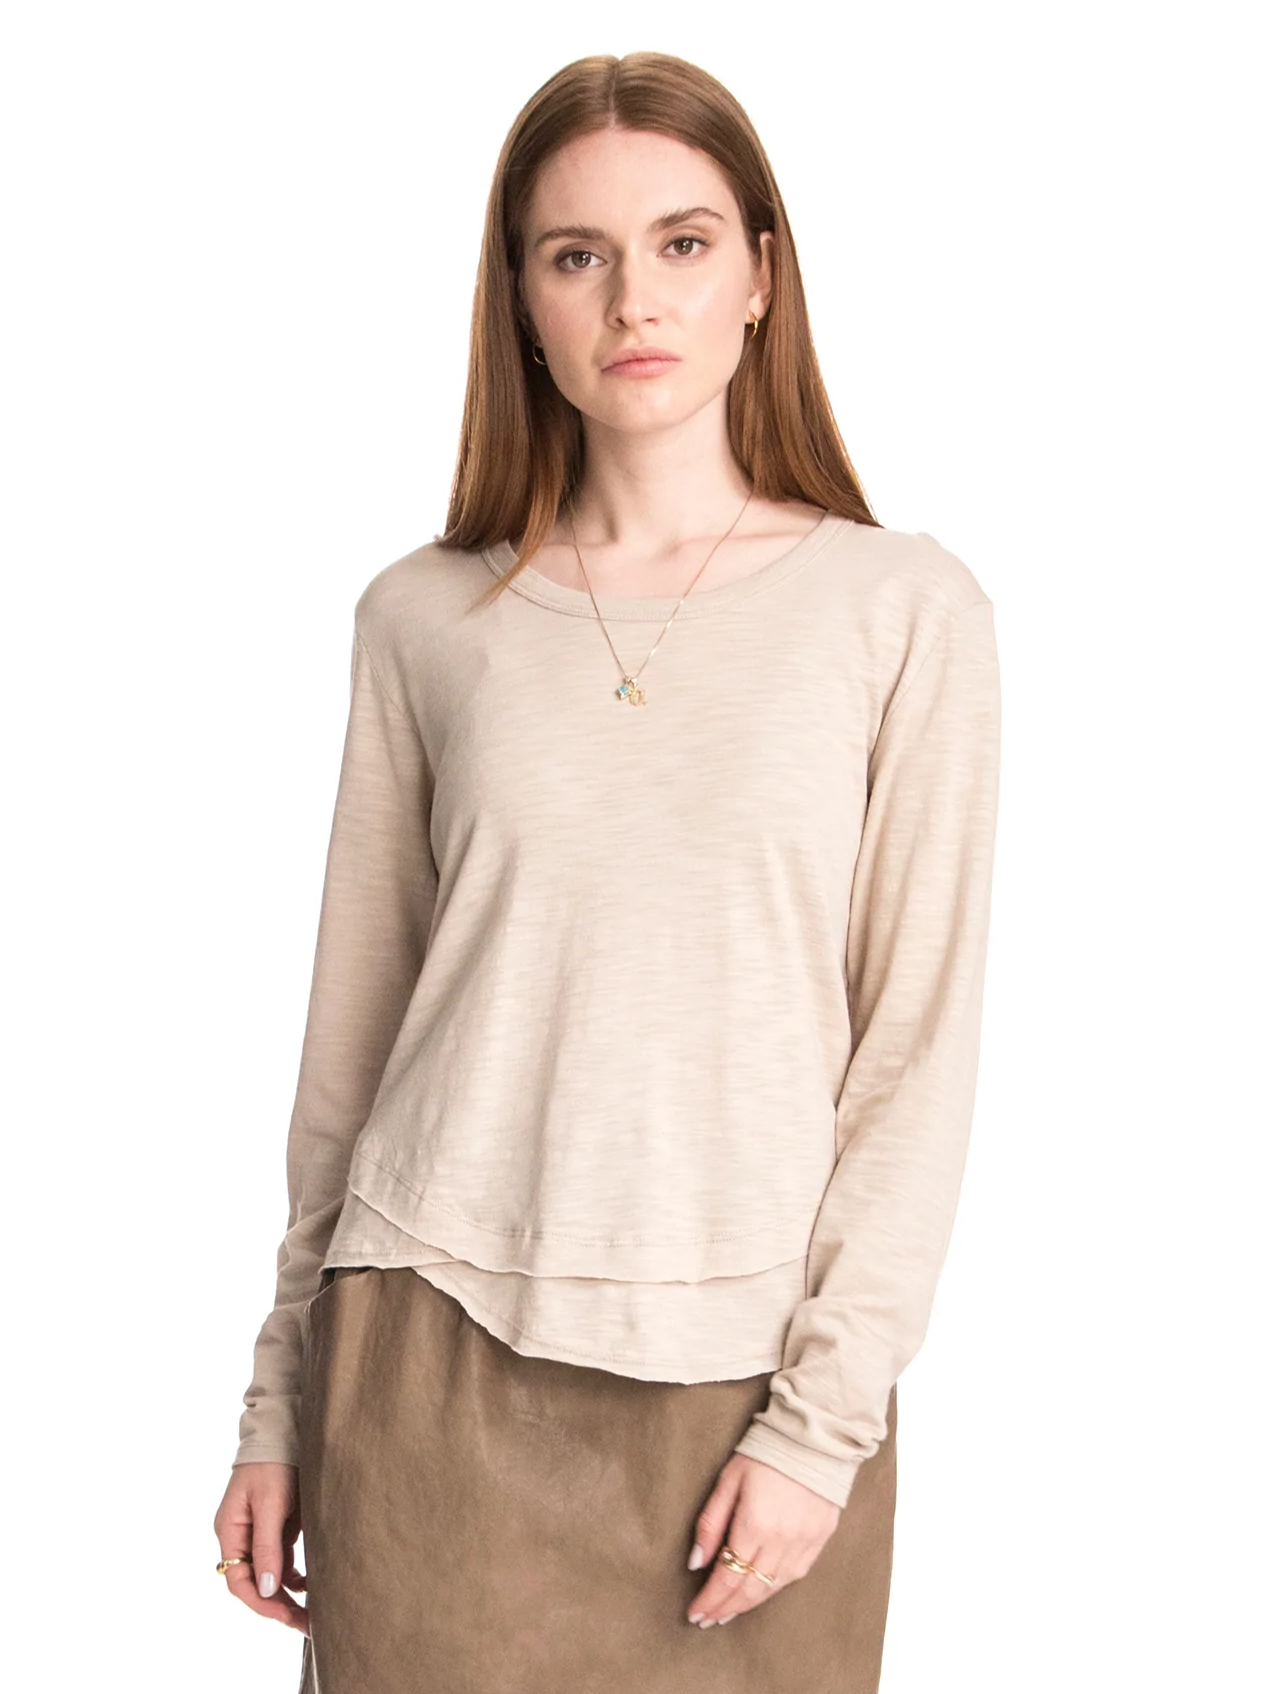 CHRLDR Ava Long Sleeve Tee in Taupe - Size L Available